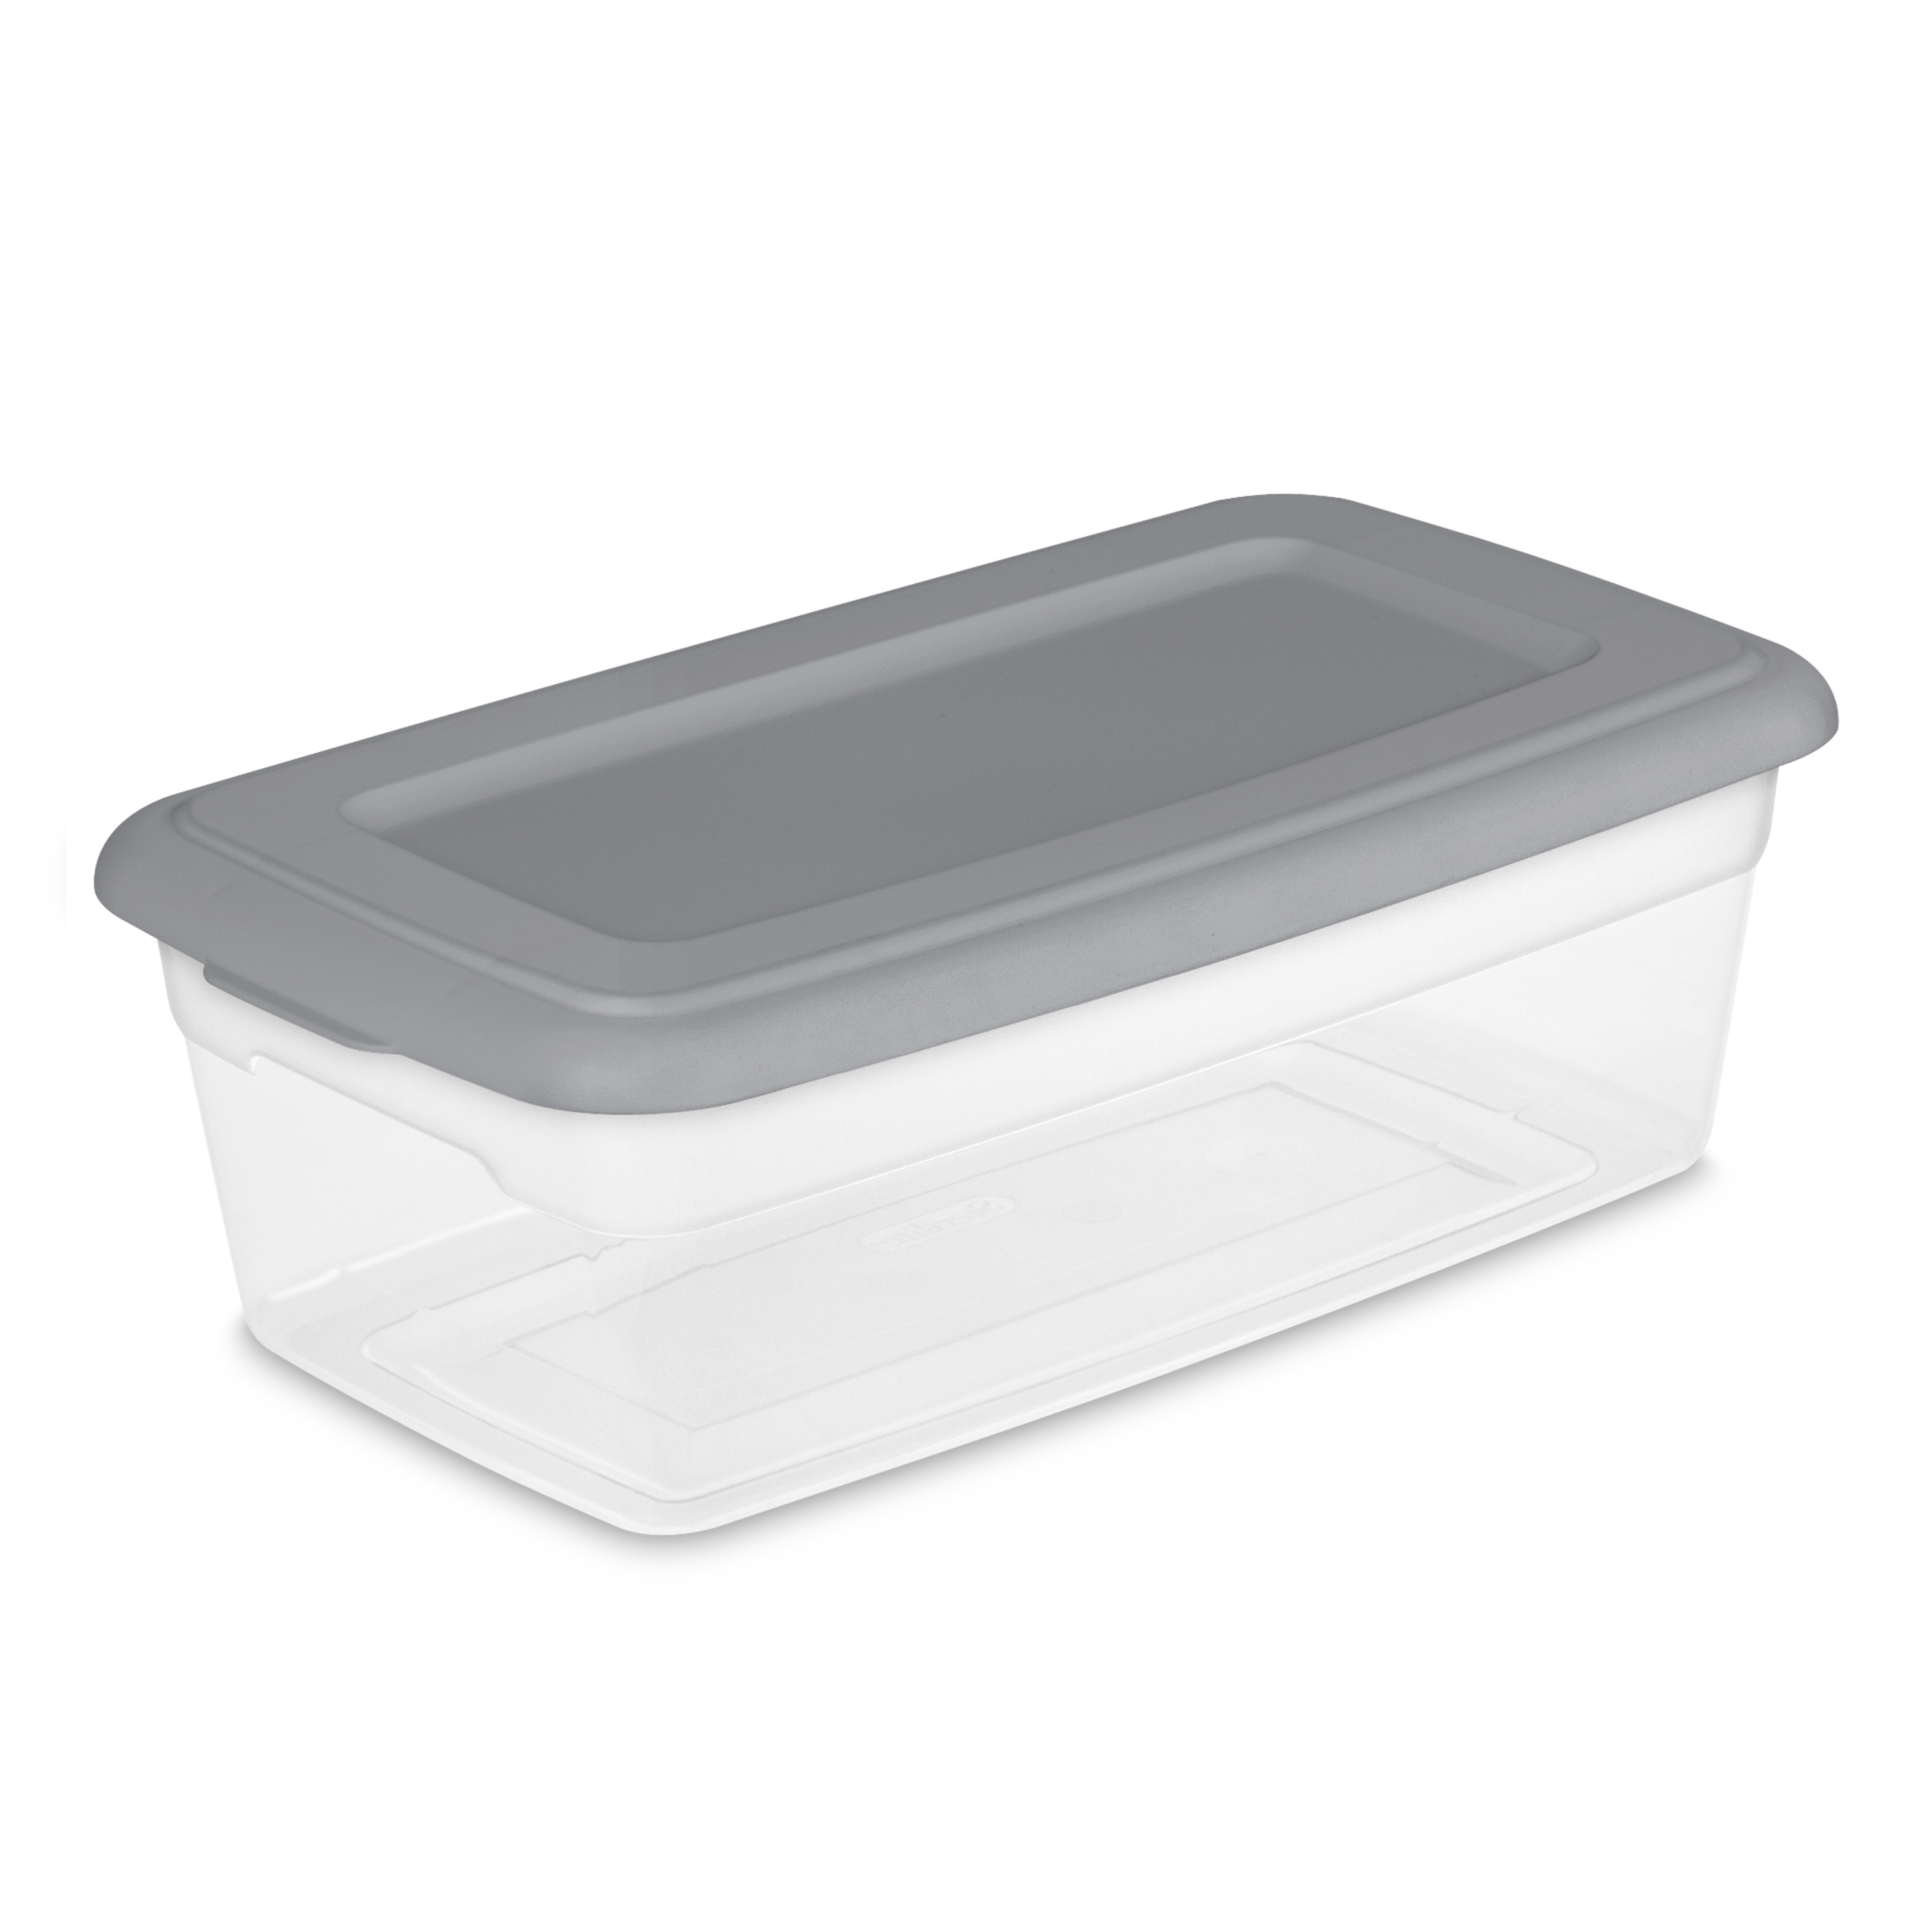 Sterilite Set of (10) 6 Qt. Clear Plastic Storage Boxes with Gray Lids - image 3 of 8